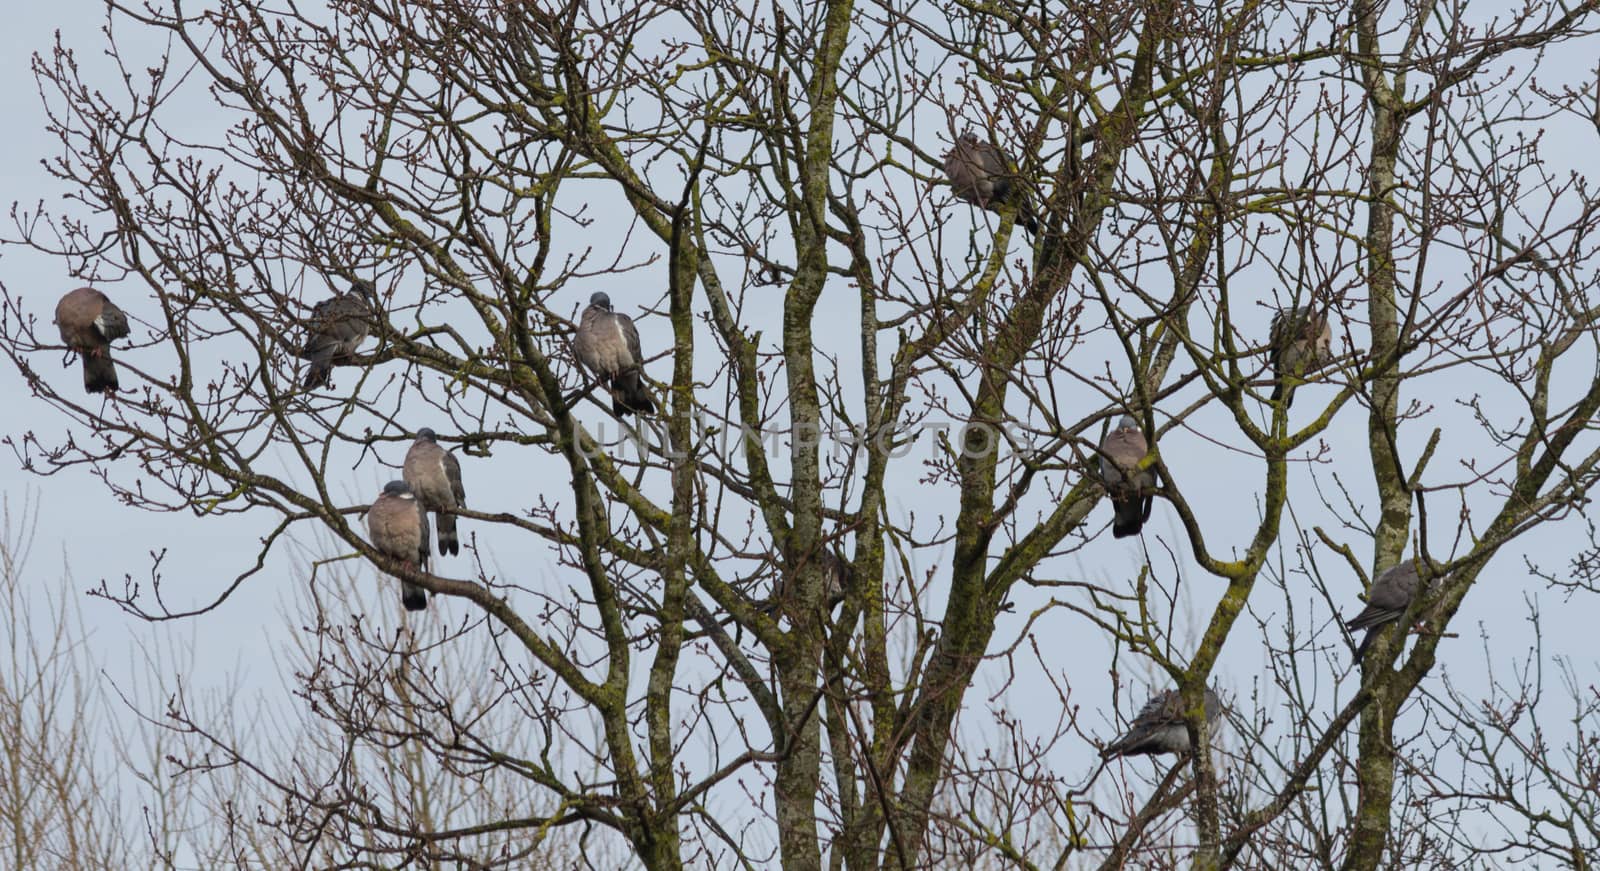 Ten pigeons gather together to roost in a tree